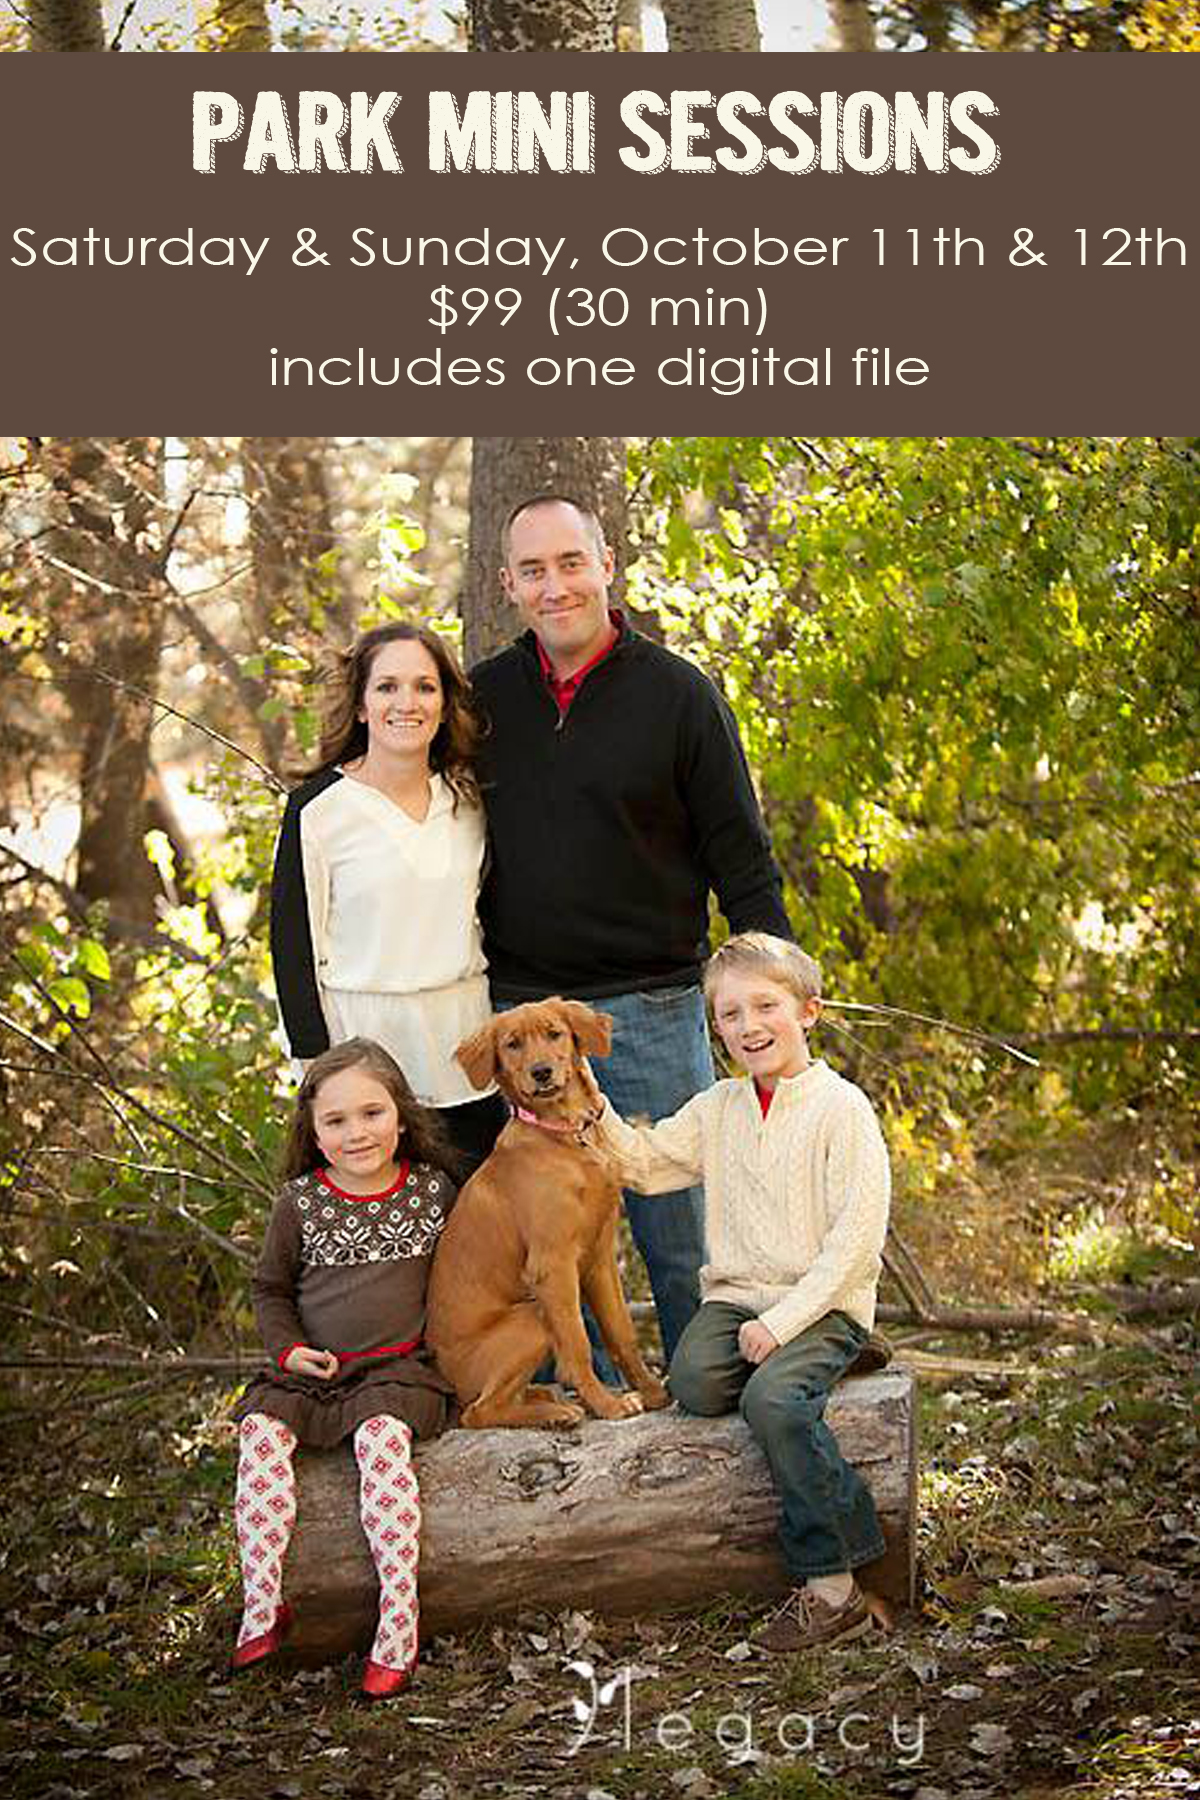 Park Mini Sessions | Saturday & Sunday, October 11th & 12th | $99 (30 min) includes one digital file. 